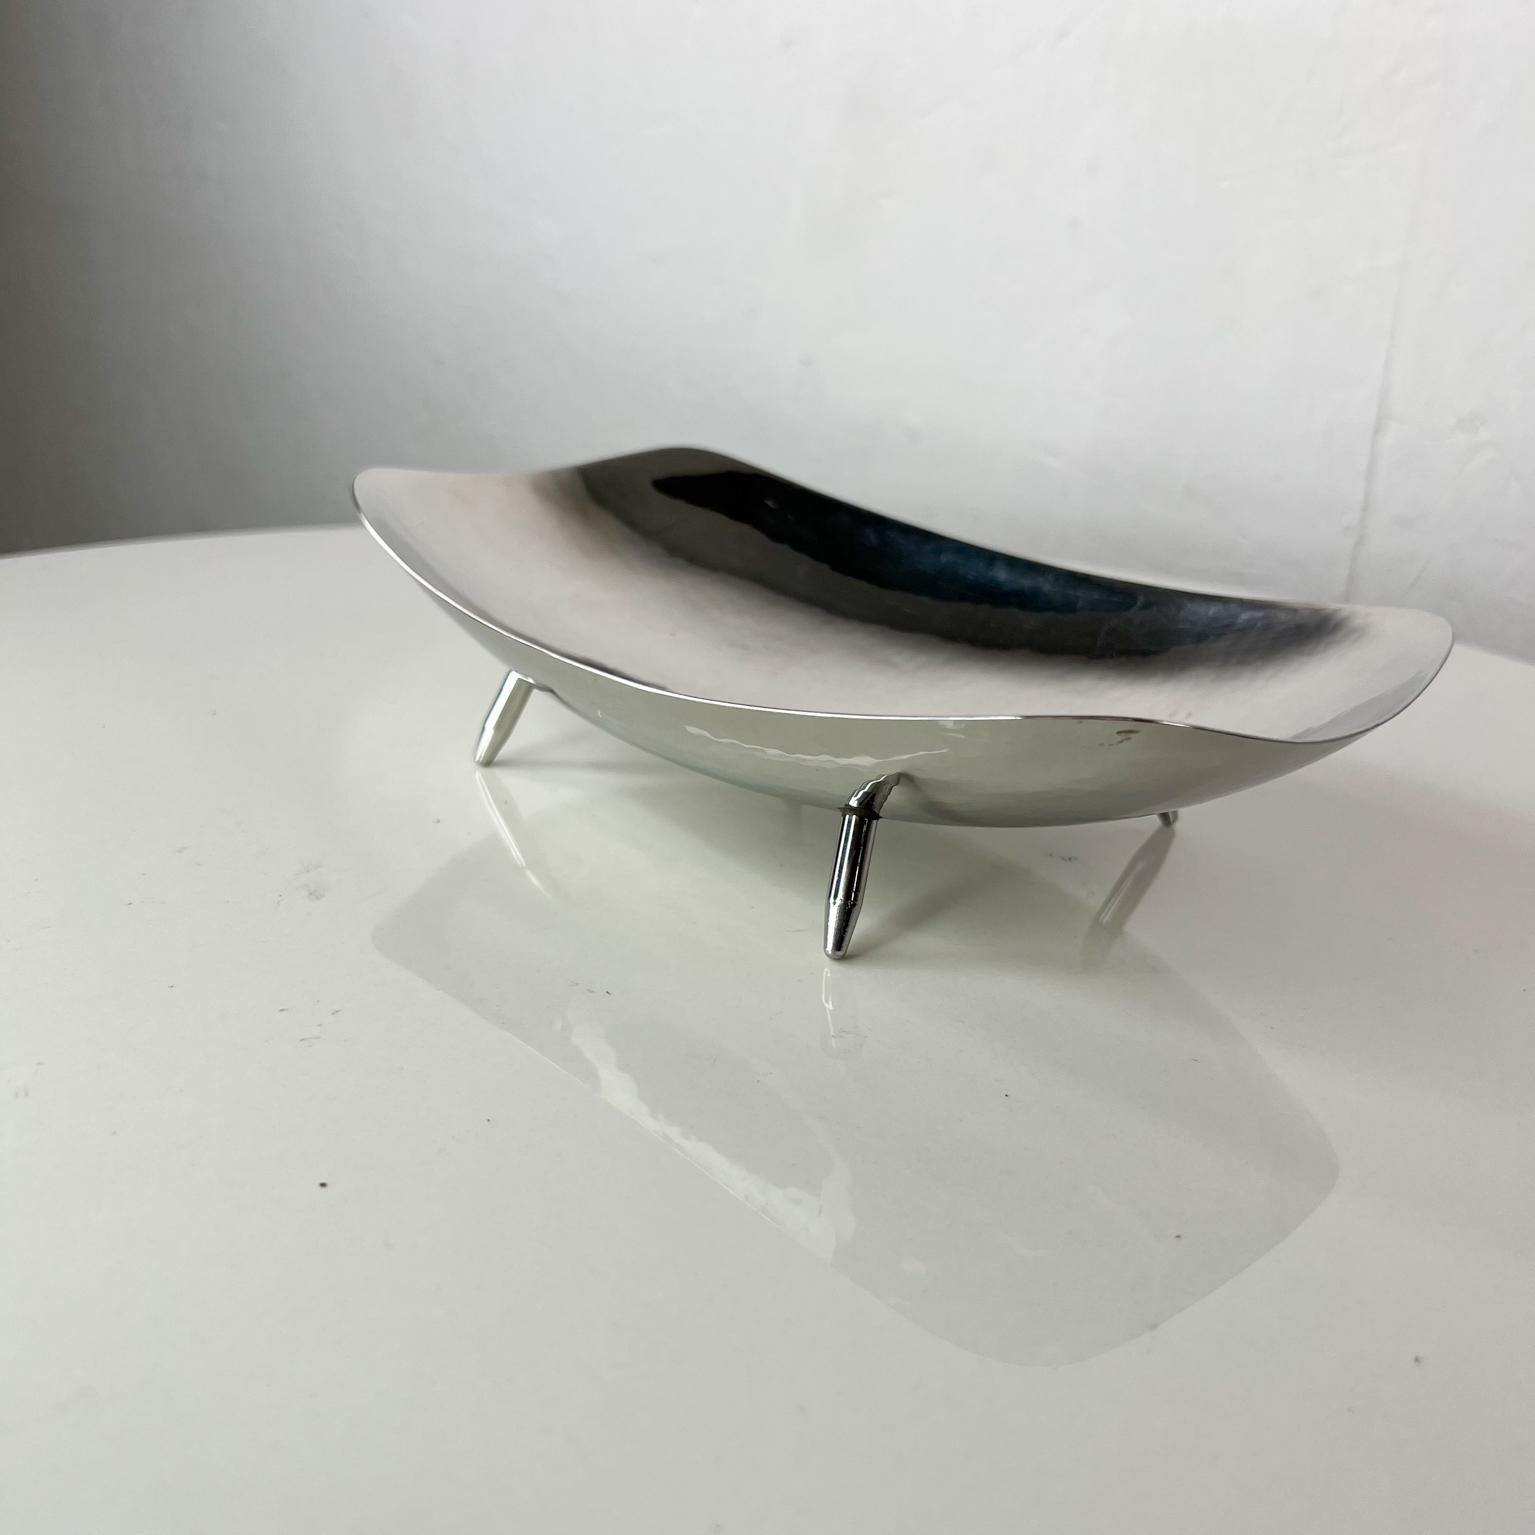 Mid-20th Century 1940s Modernist Sculptural Chrome Dish Footed Keswick School Industrial Arts UK